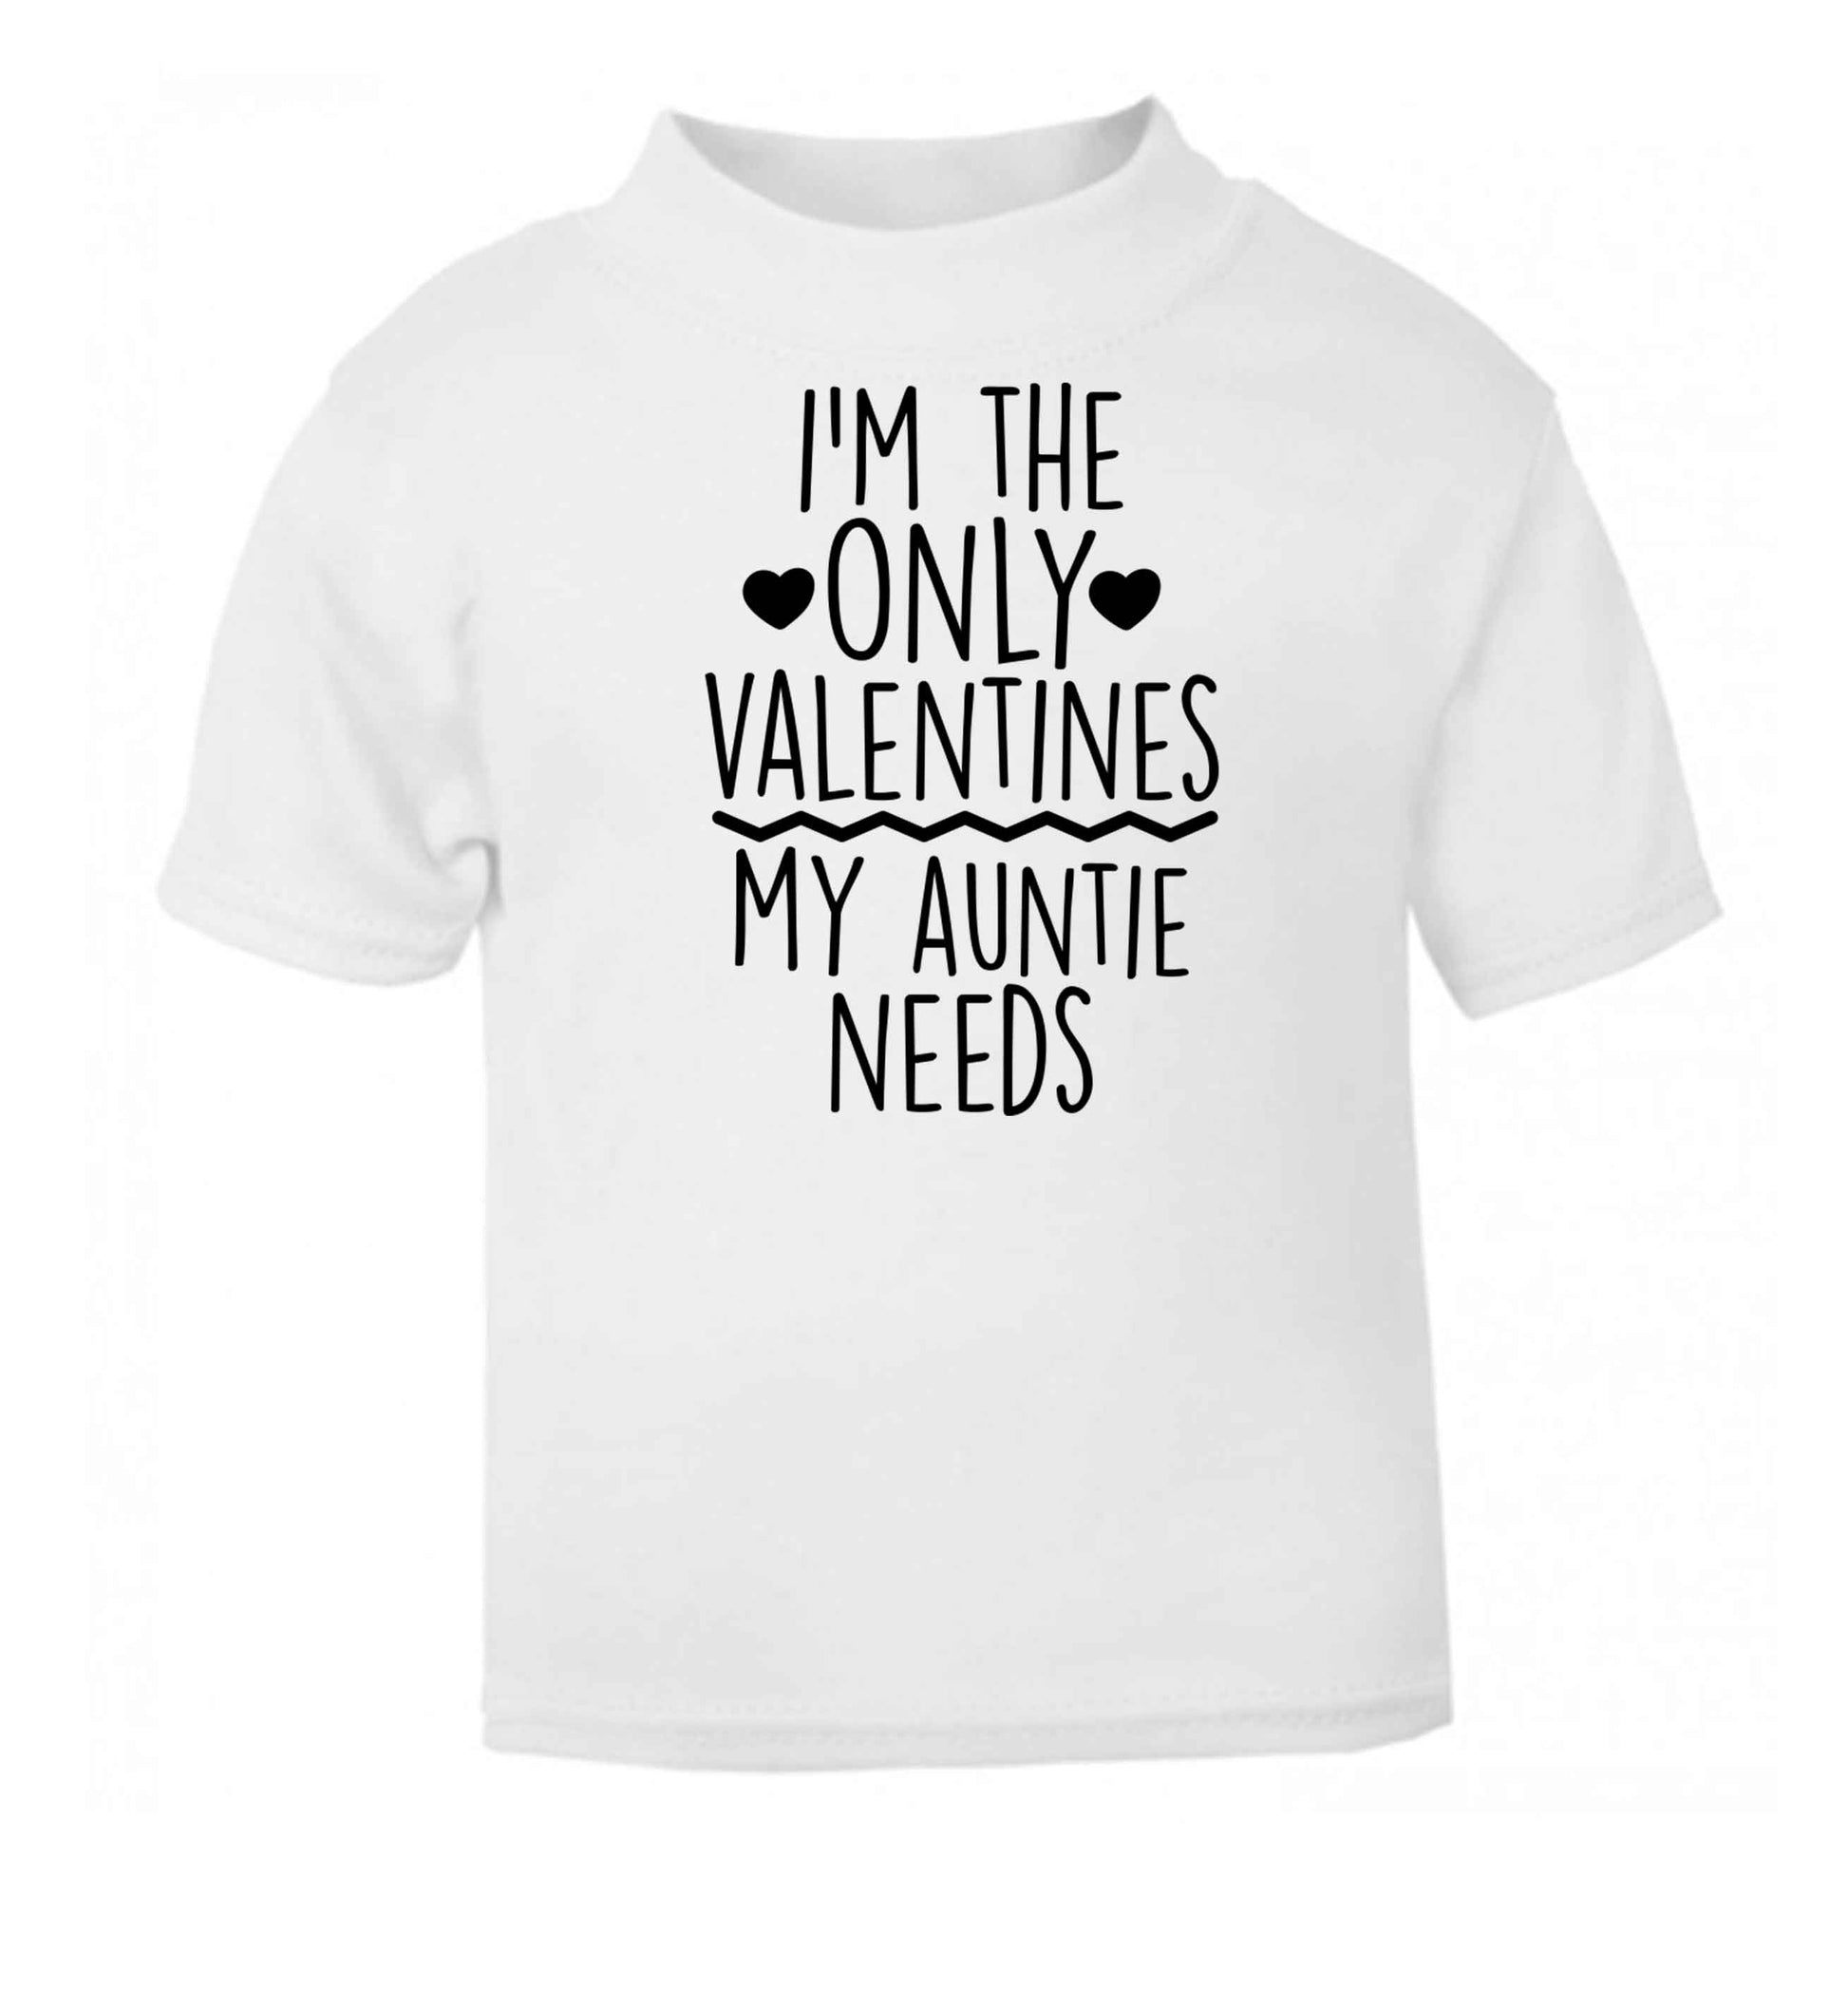 I'm the only valentines my auntie needs white baby toddler Tshirt 2 Years